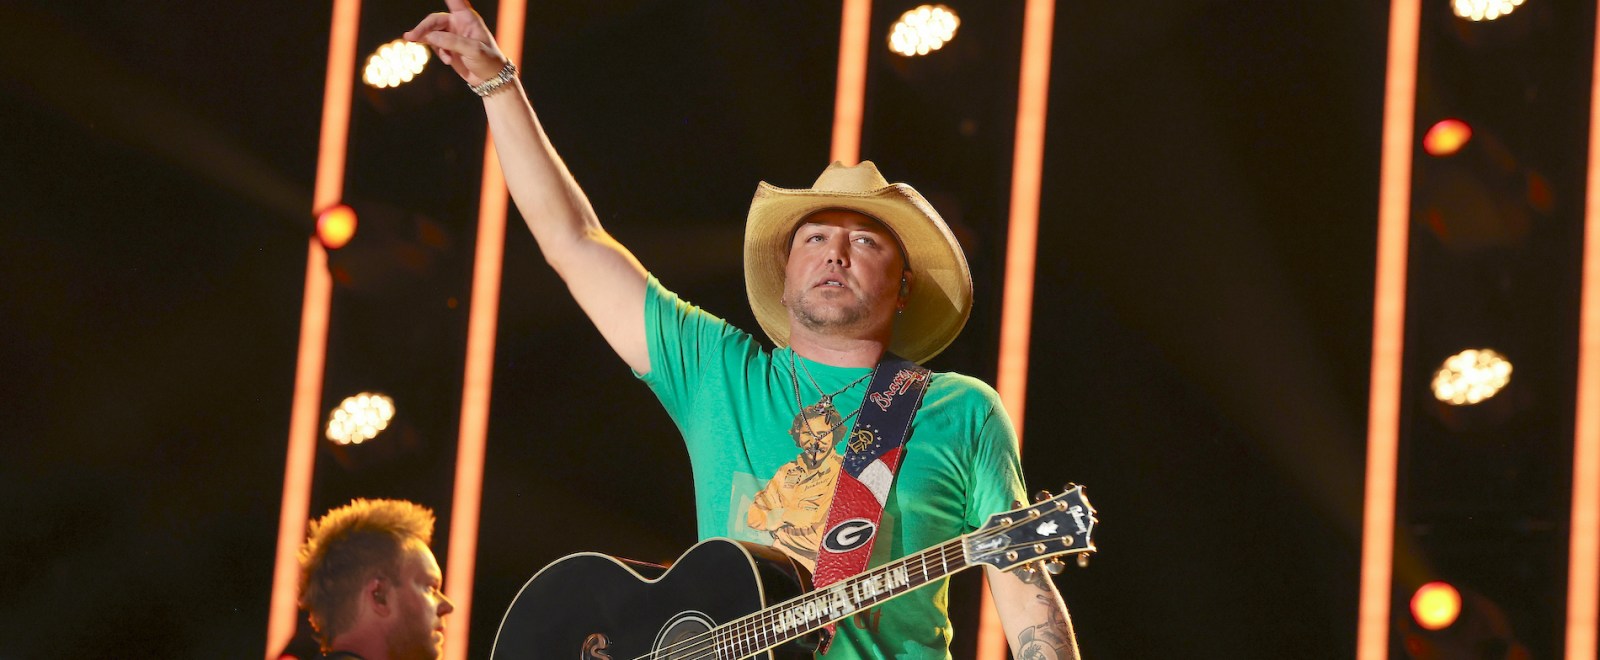 Jason Aldean’s ProGun Song ‘Try That In A Small Town’ Has Twitter